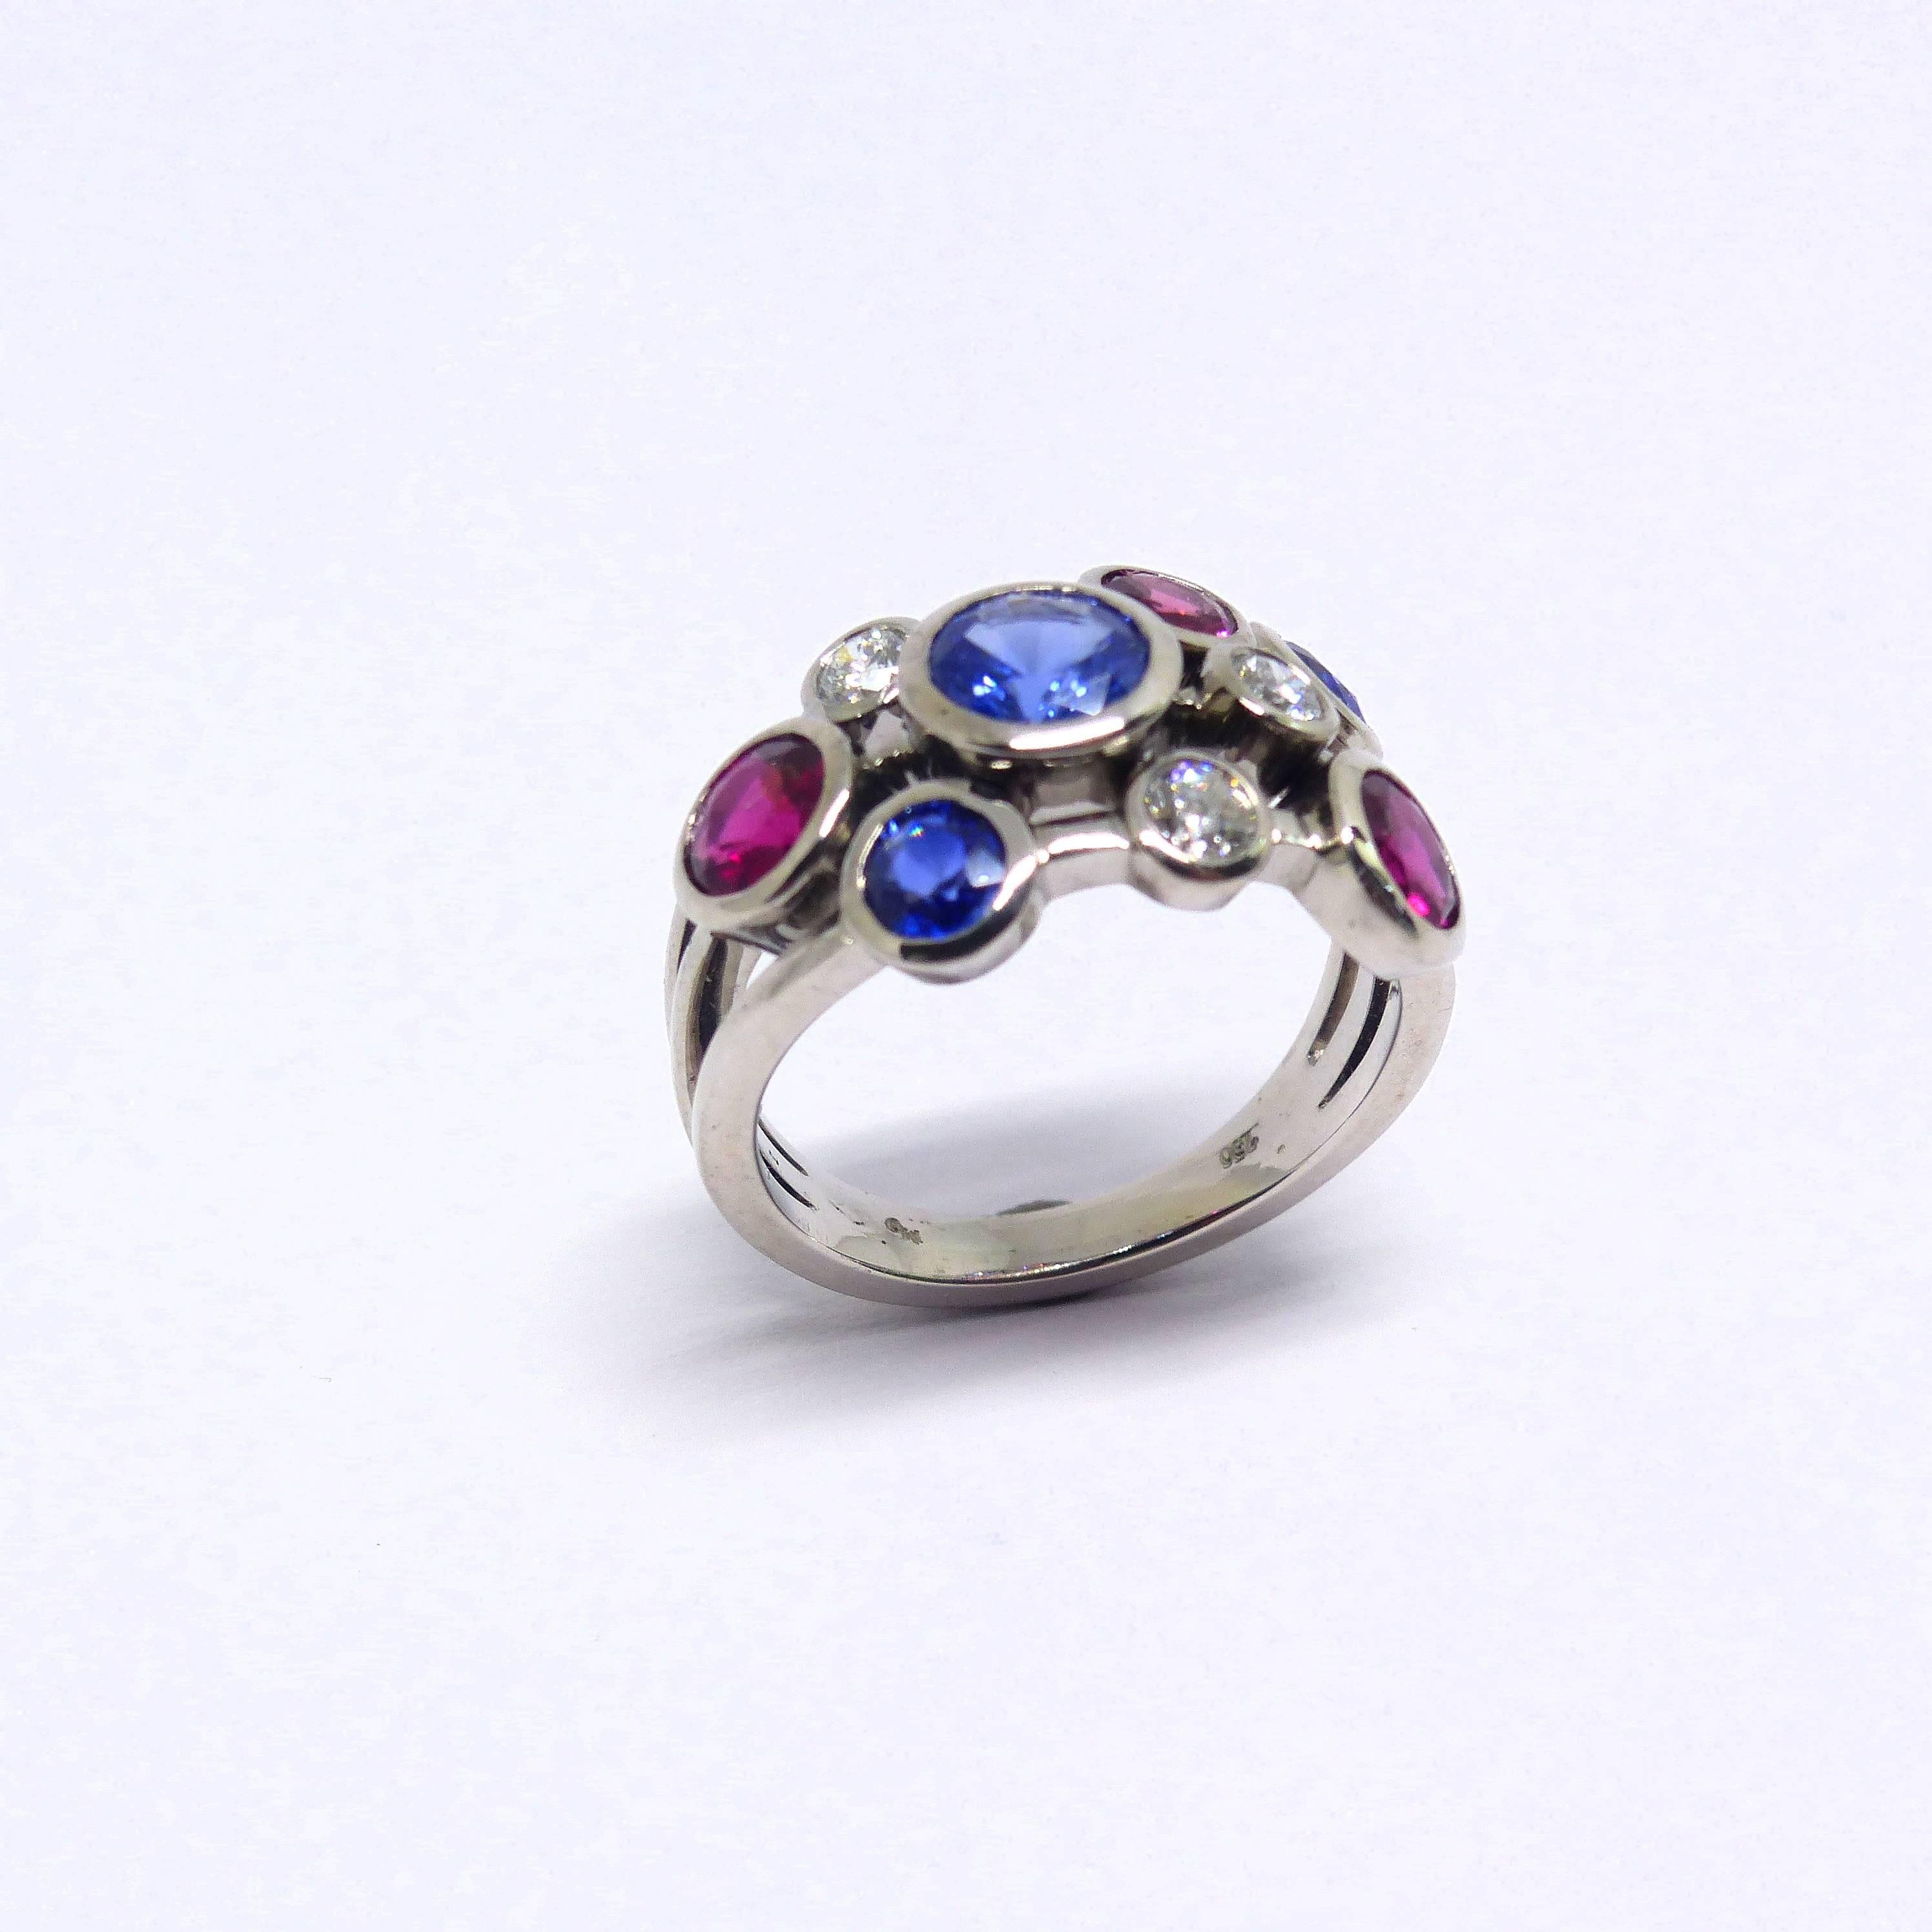 Thomas Leyser is renowned for his contemporary jewellery designs utilizing fine gemstones. 

This 18k white gold ring (8.44g) is set with 3x fine Sapphires (round, 4-6mm, 1.69ct) + 3x Rubelites (round 4-5mm, 1.15ct) + 3x Diamonds (brillant-cut, 3mm,